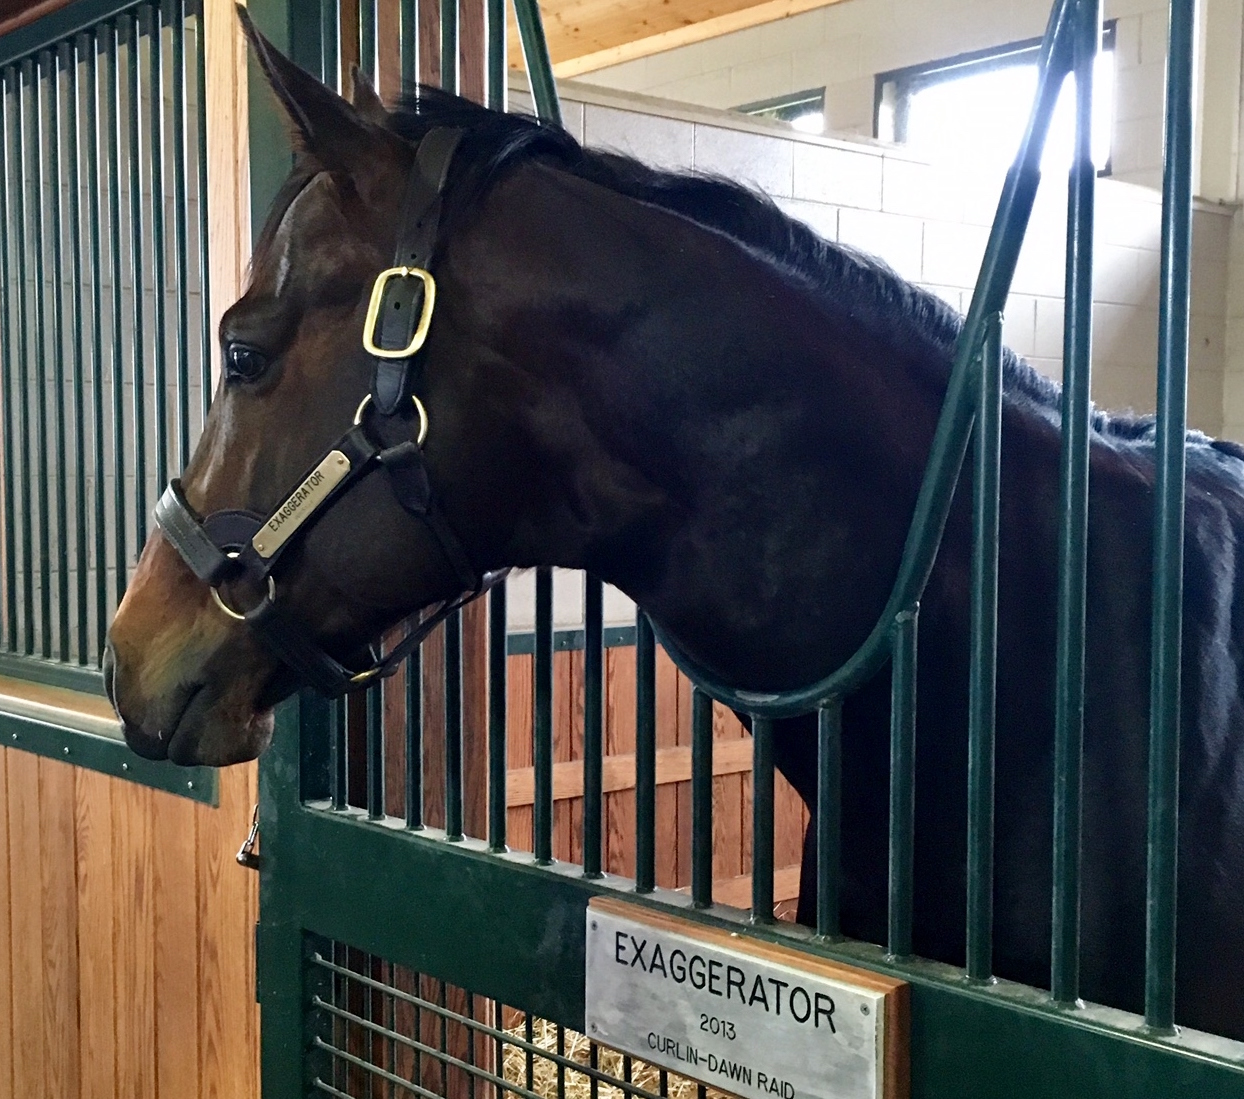 Exaggerator, standing his first season at stud at WinStar, enjoys getting mints from fans. Photo: Amanda Duckworth